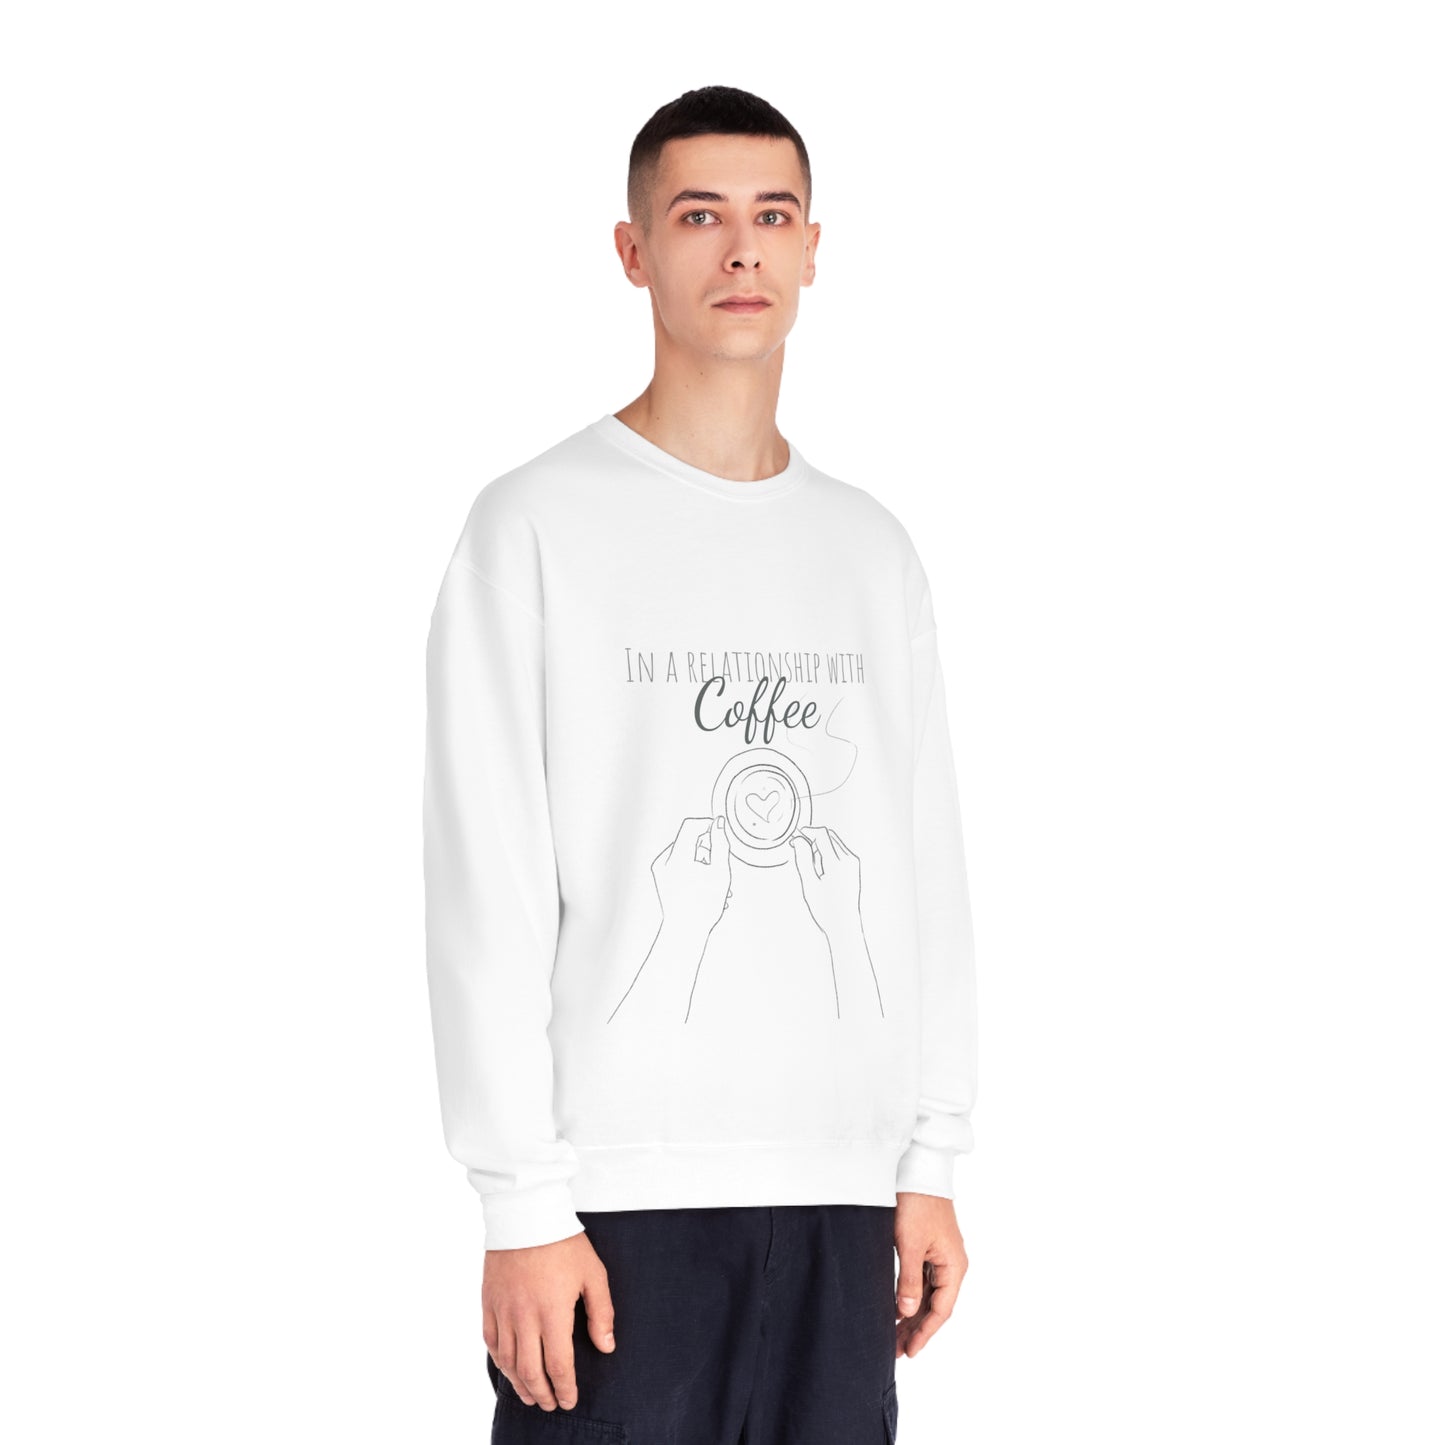 In a relationship with COFFEE Sweatshirt - Coffee sweater - Coffee Sweatshirt - Cozy Coffee Clothing